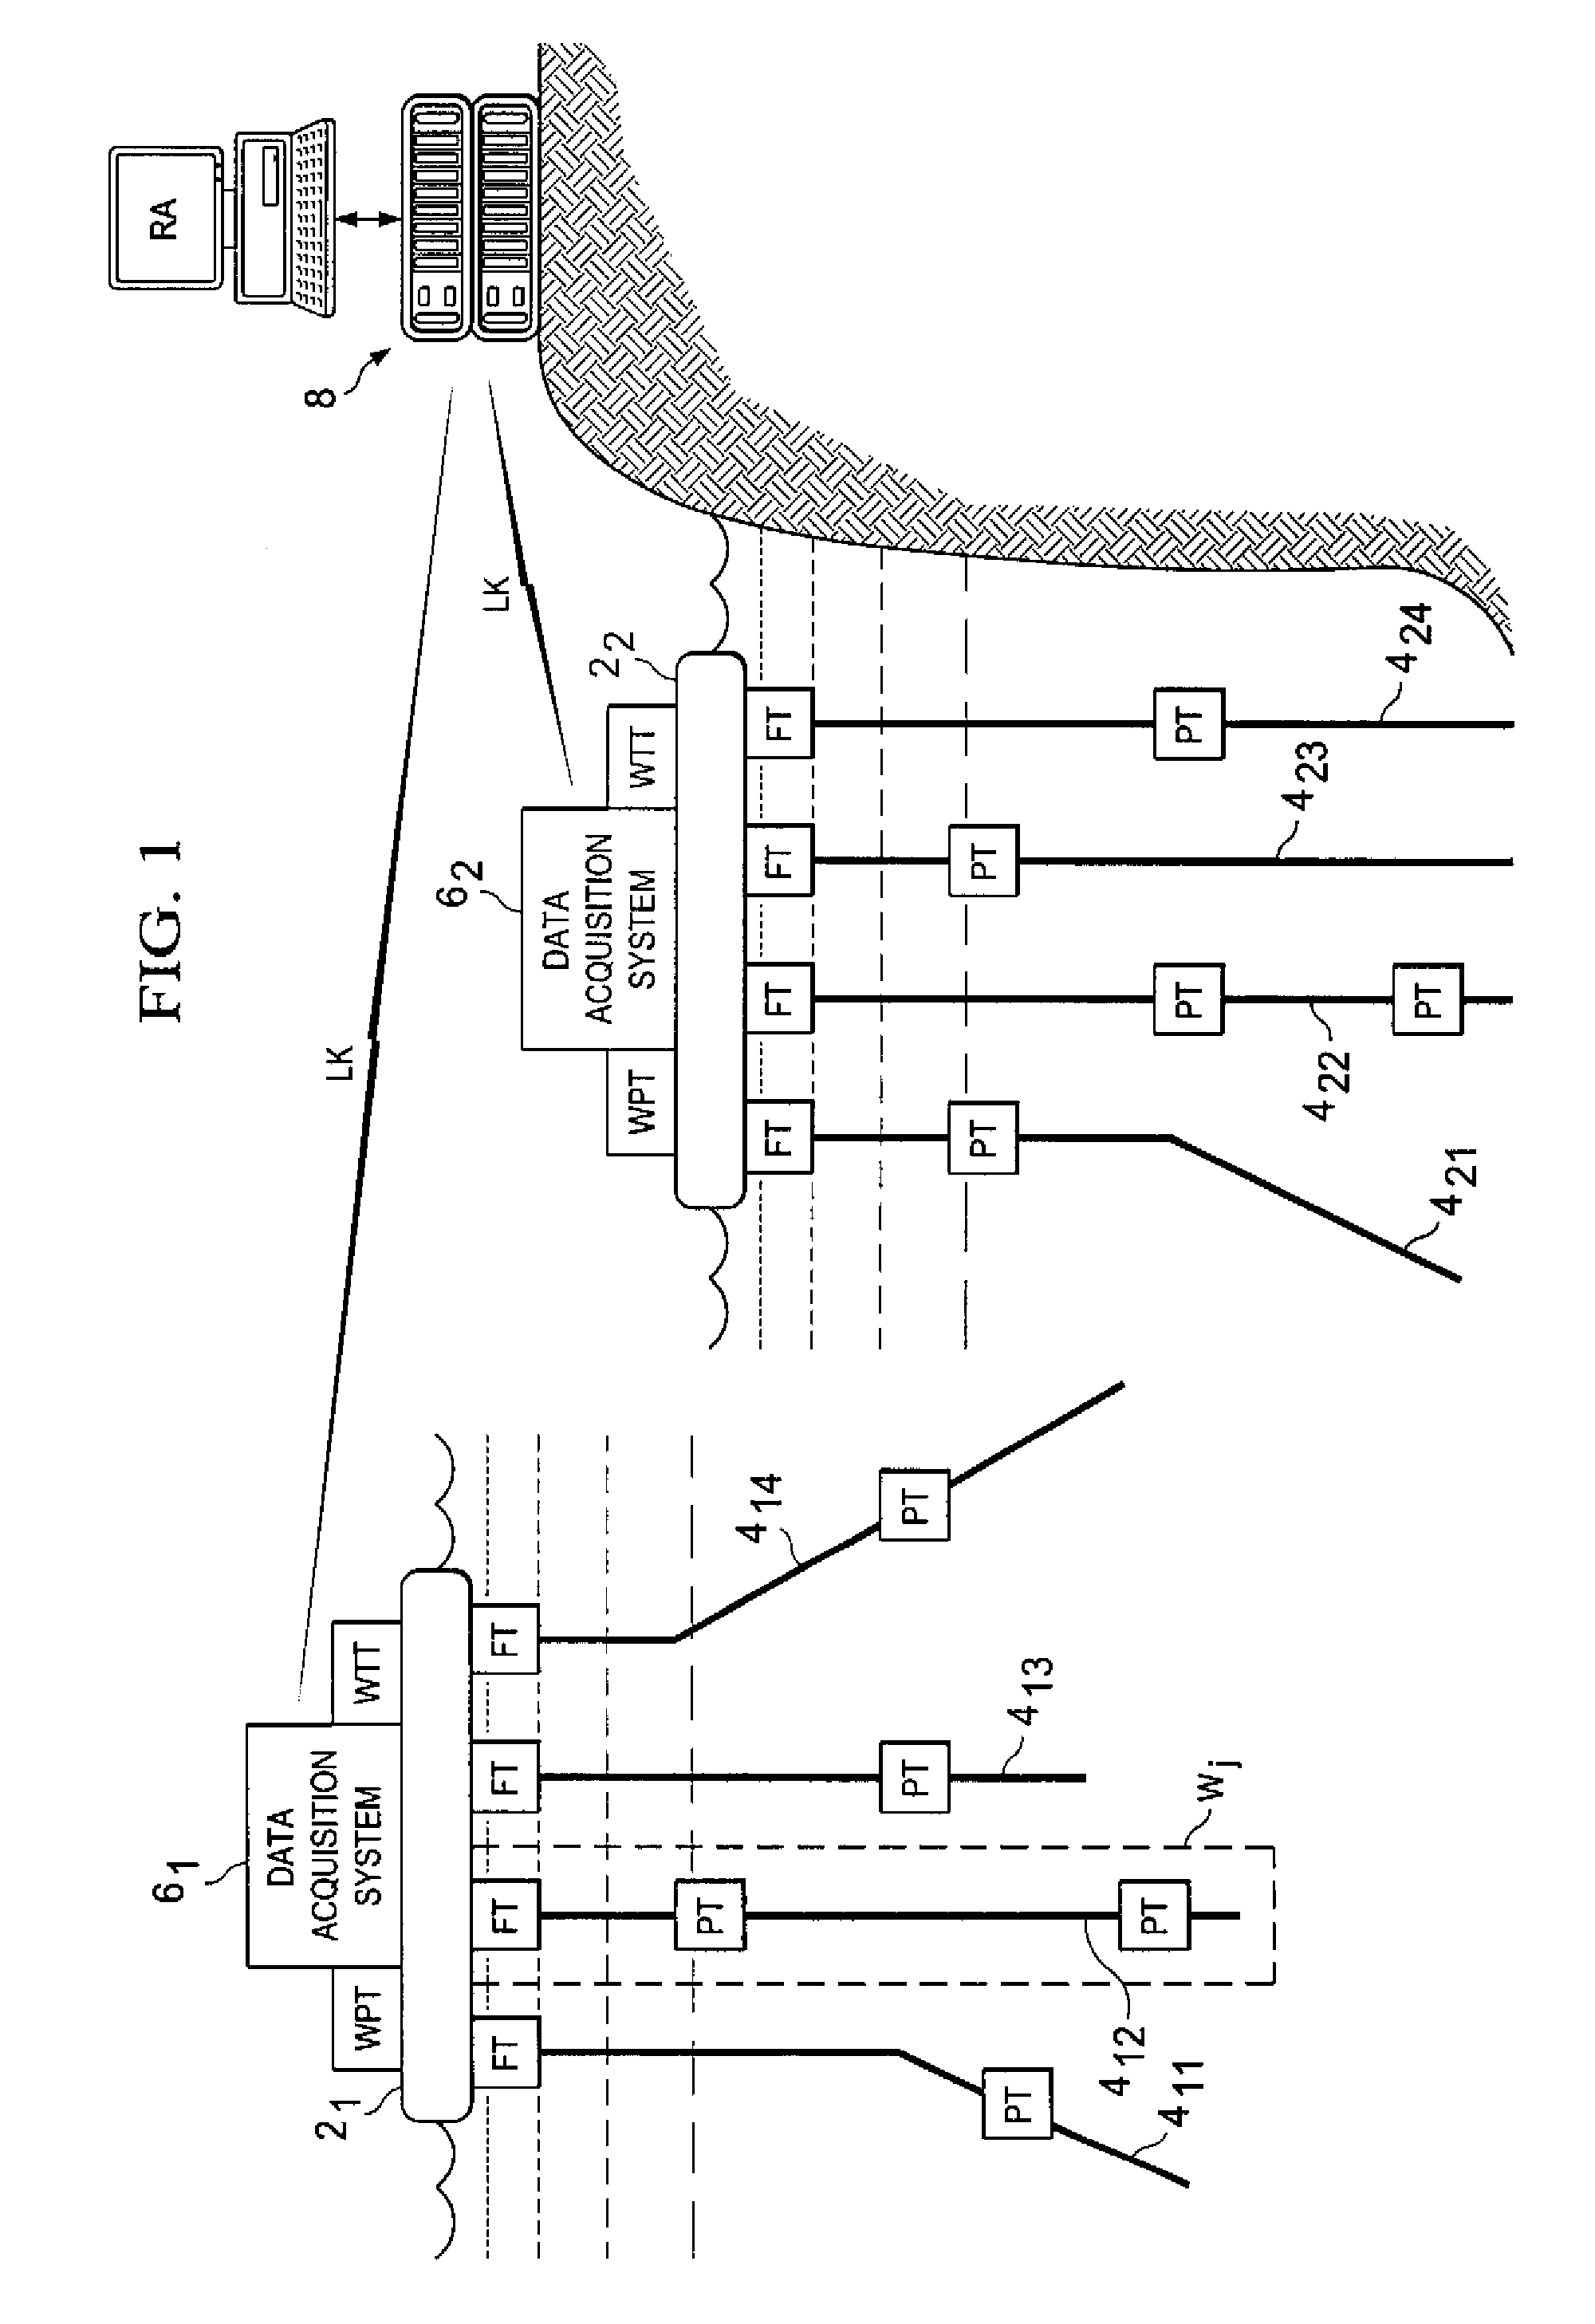 Managing flow testing and the results thereof for hydrocarbon wells